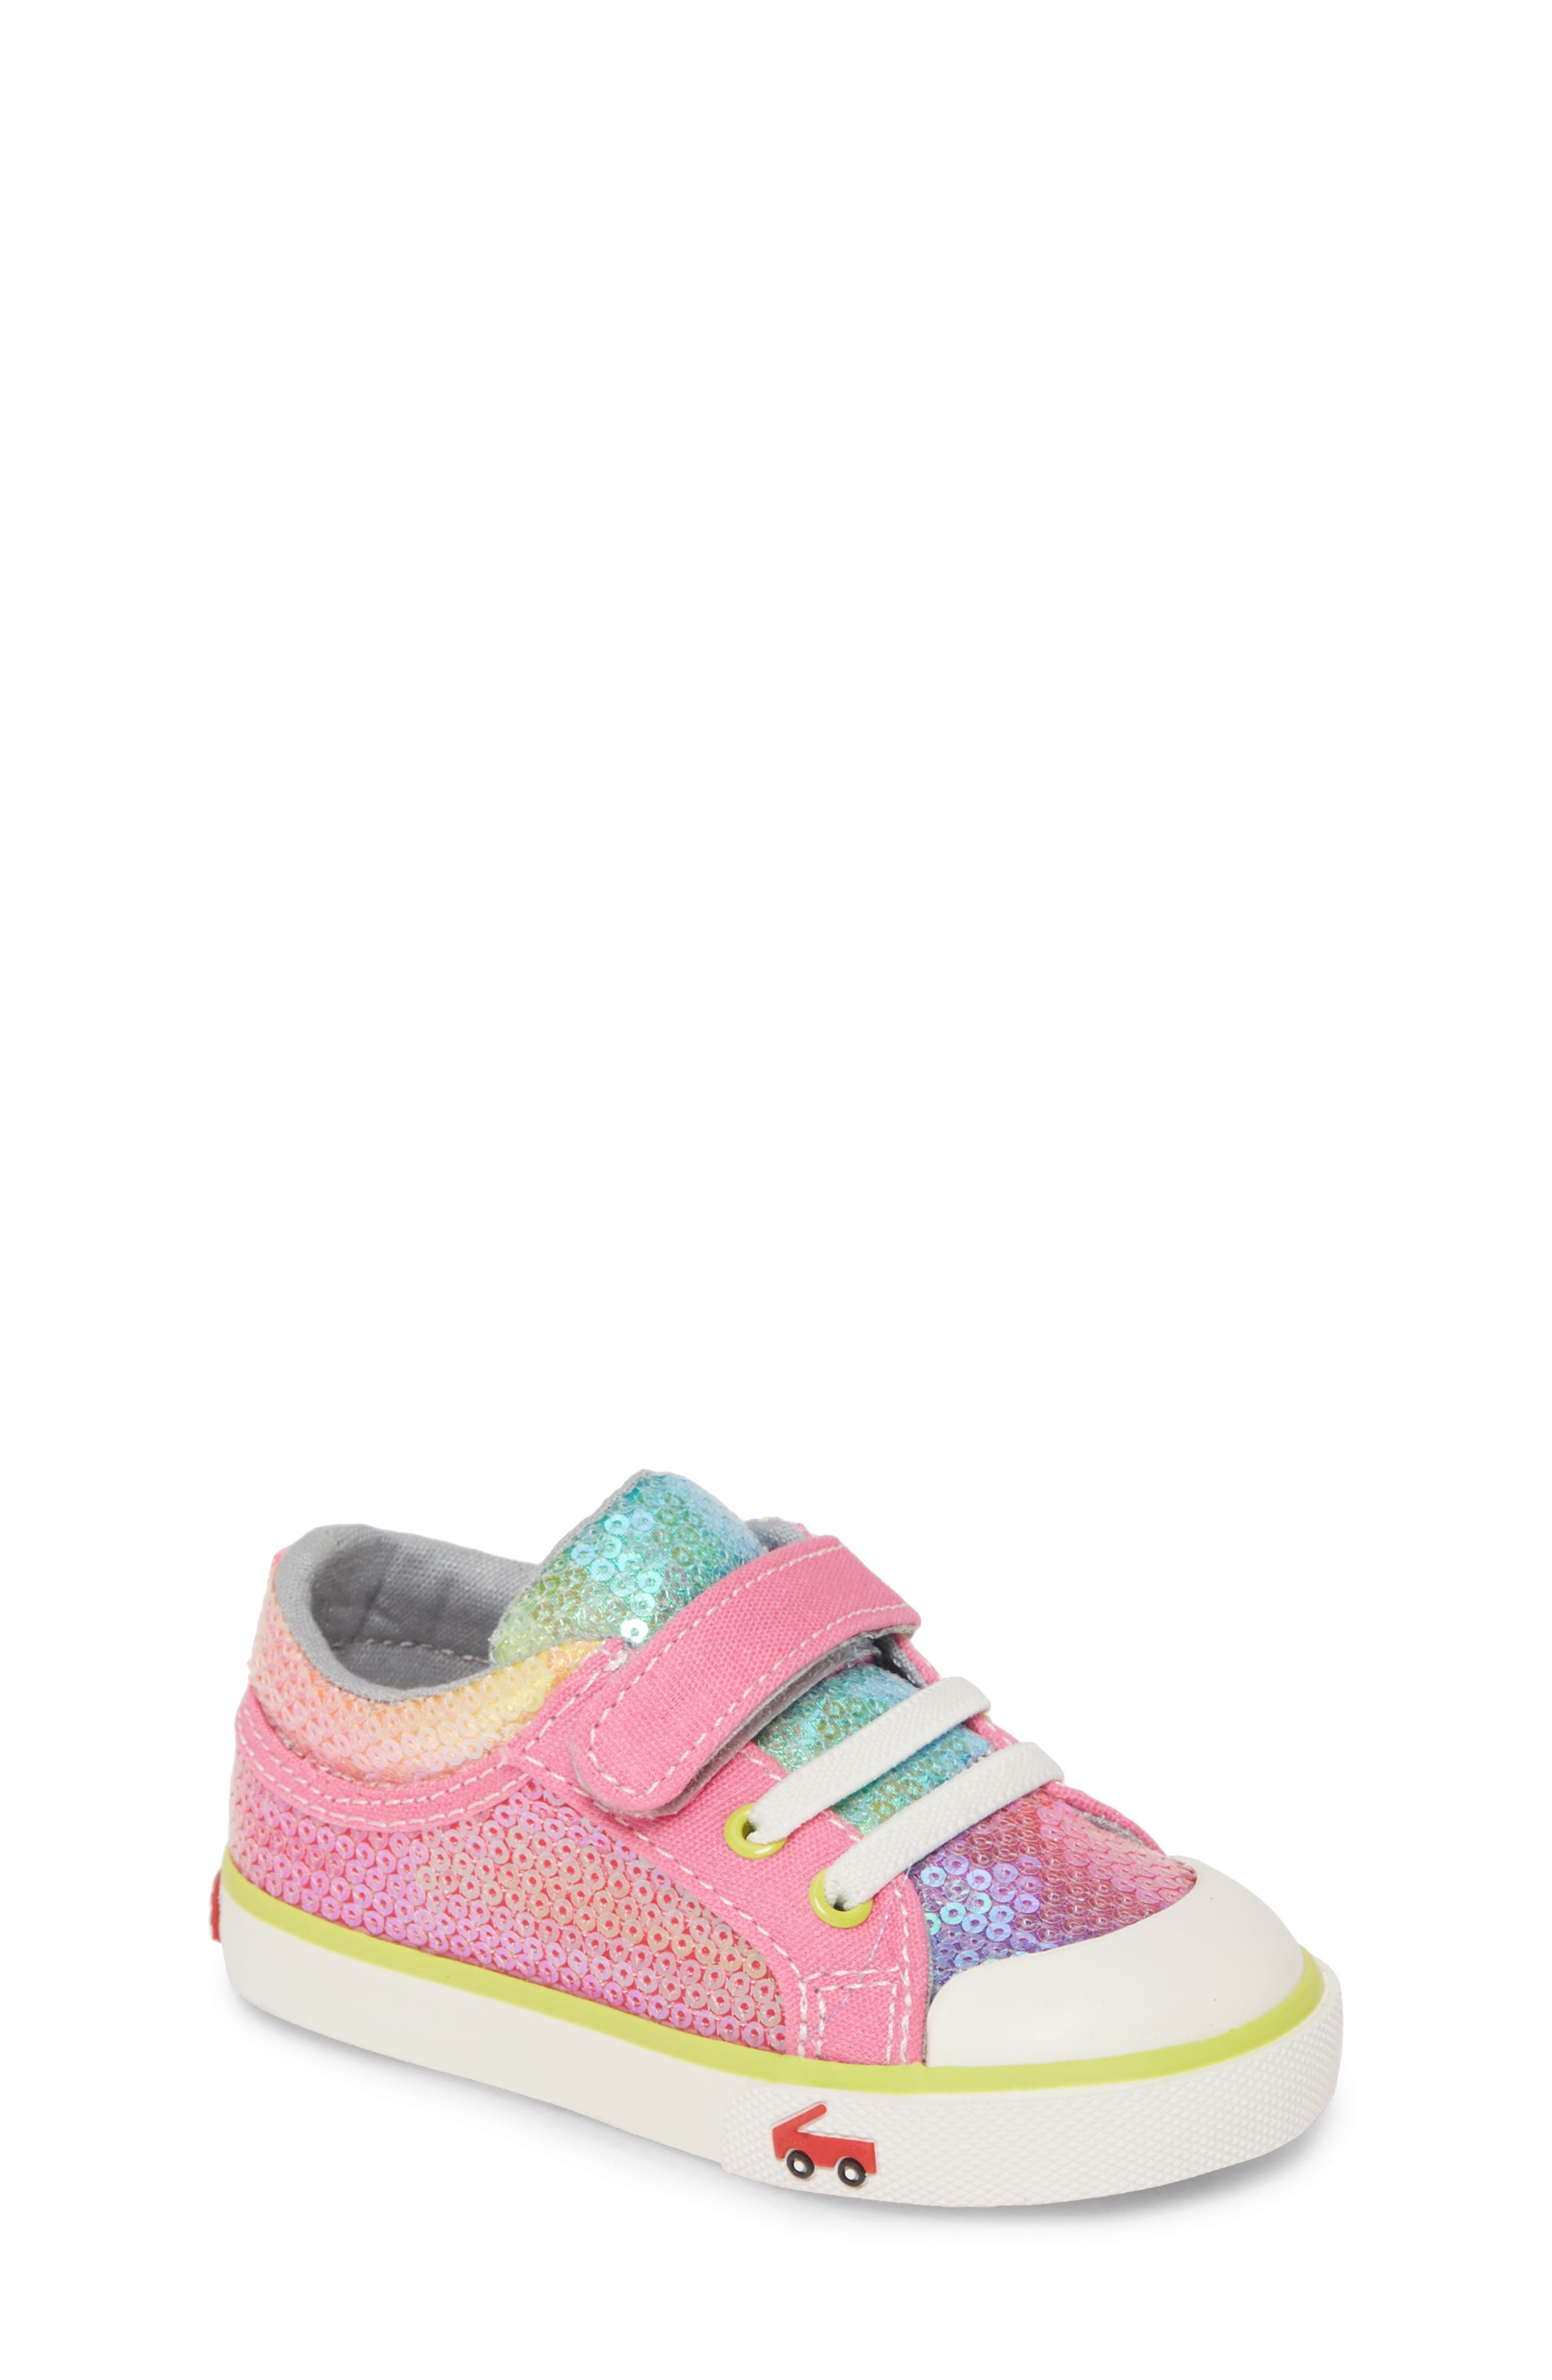 Baby's Shoes: First Walkers | Nordstrom